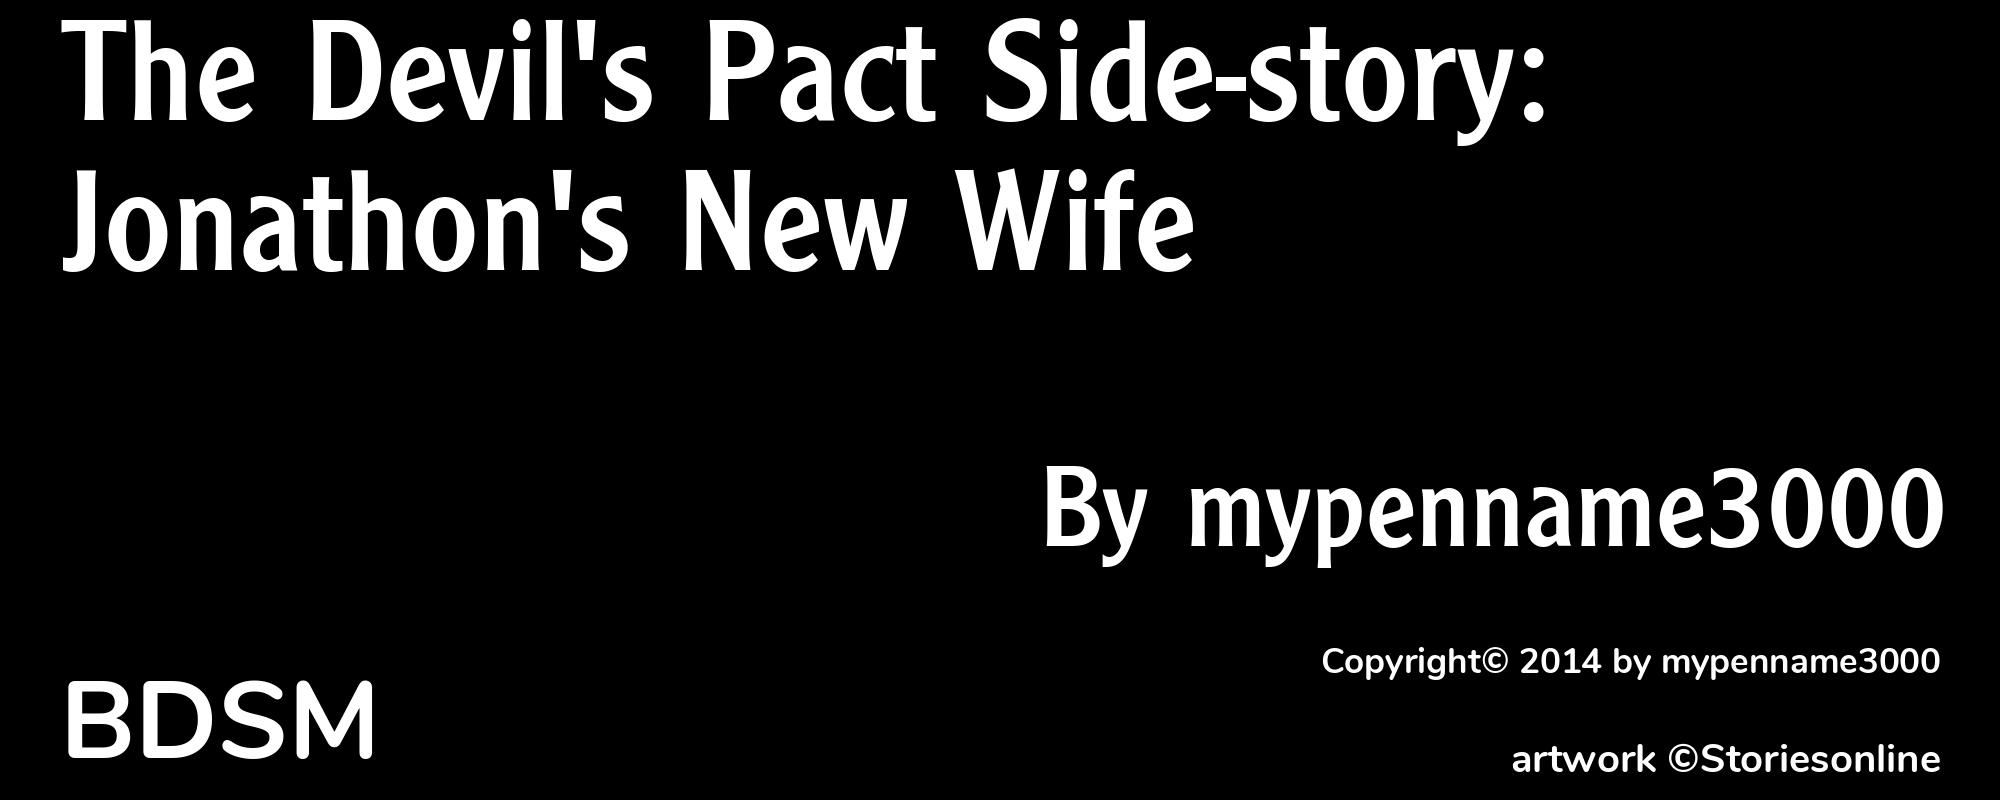 The Devil's Pact Side-story: Jonathon's New Wife - Cover